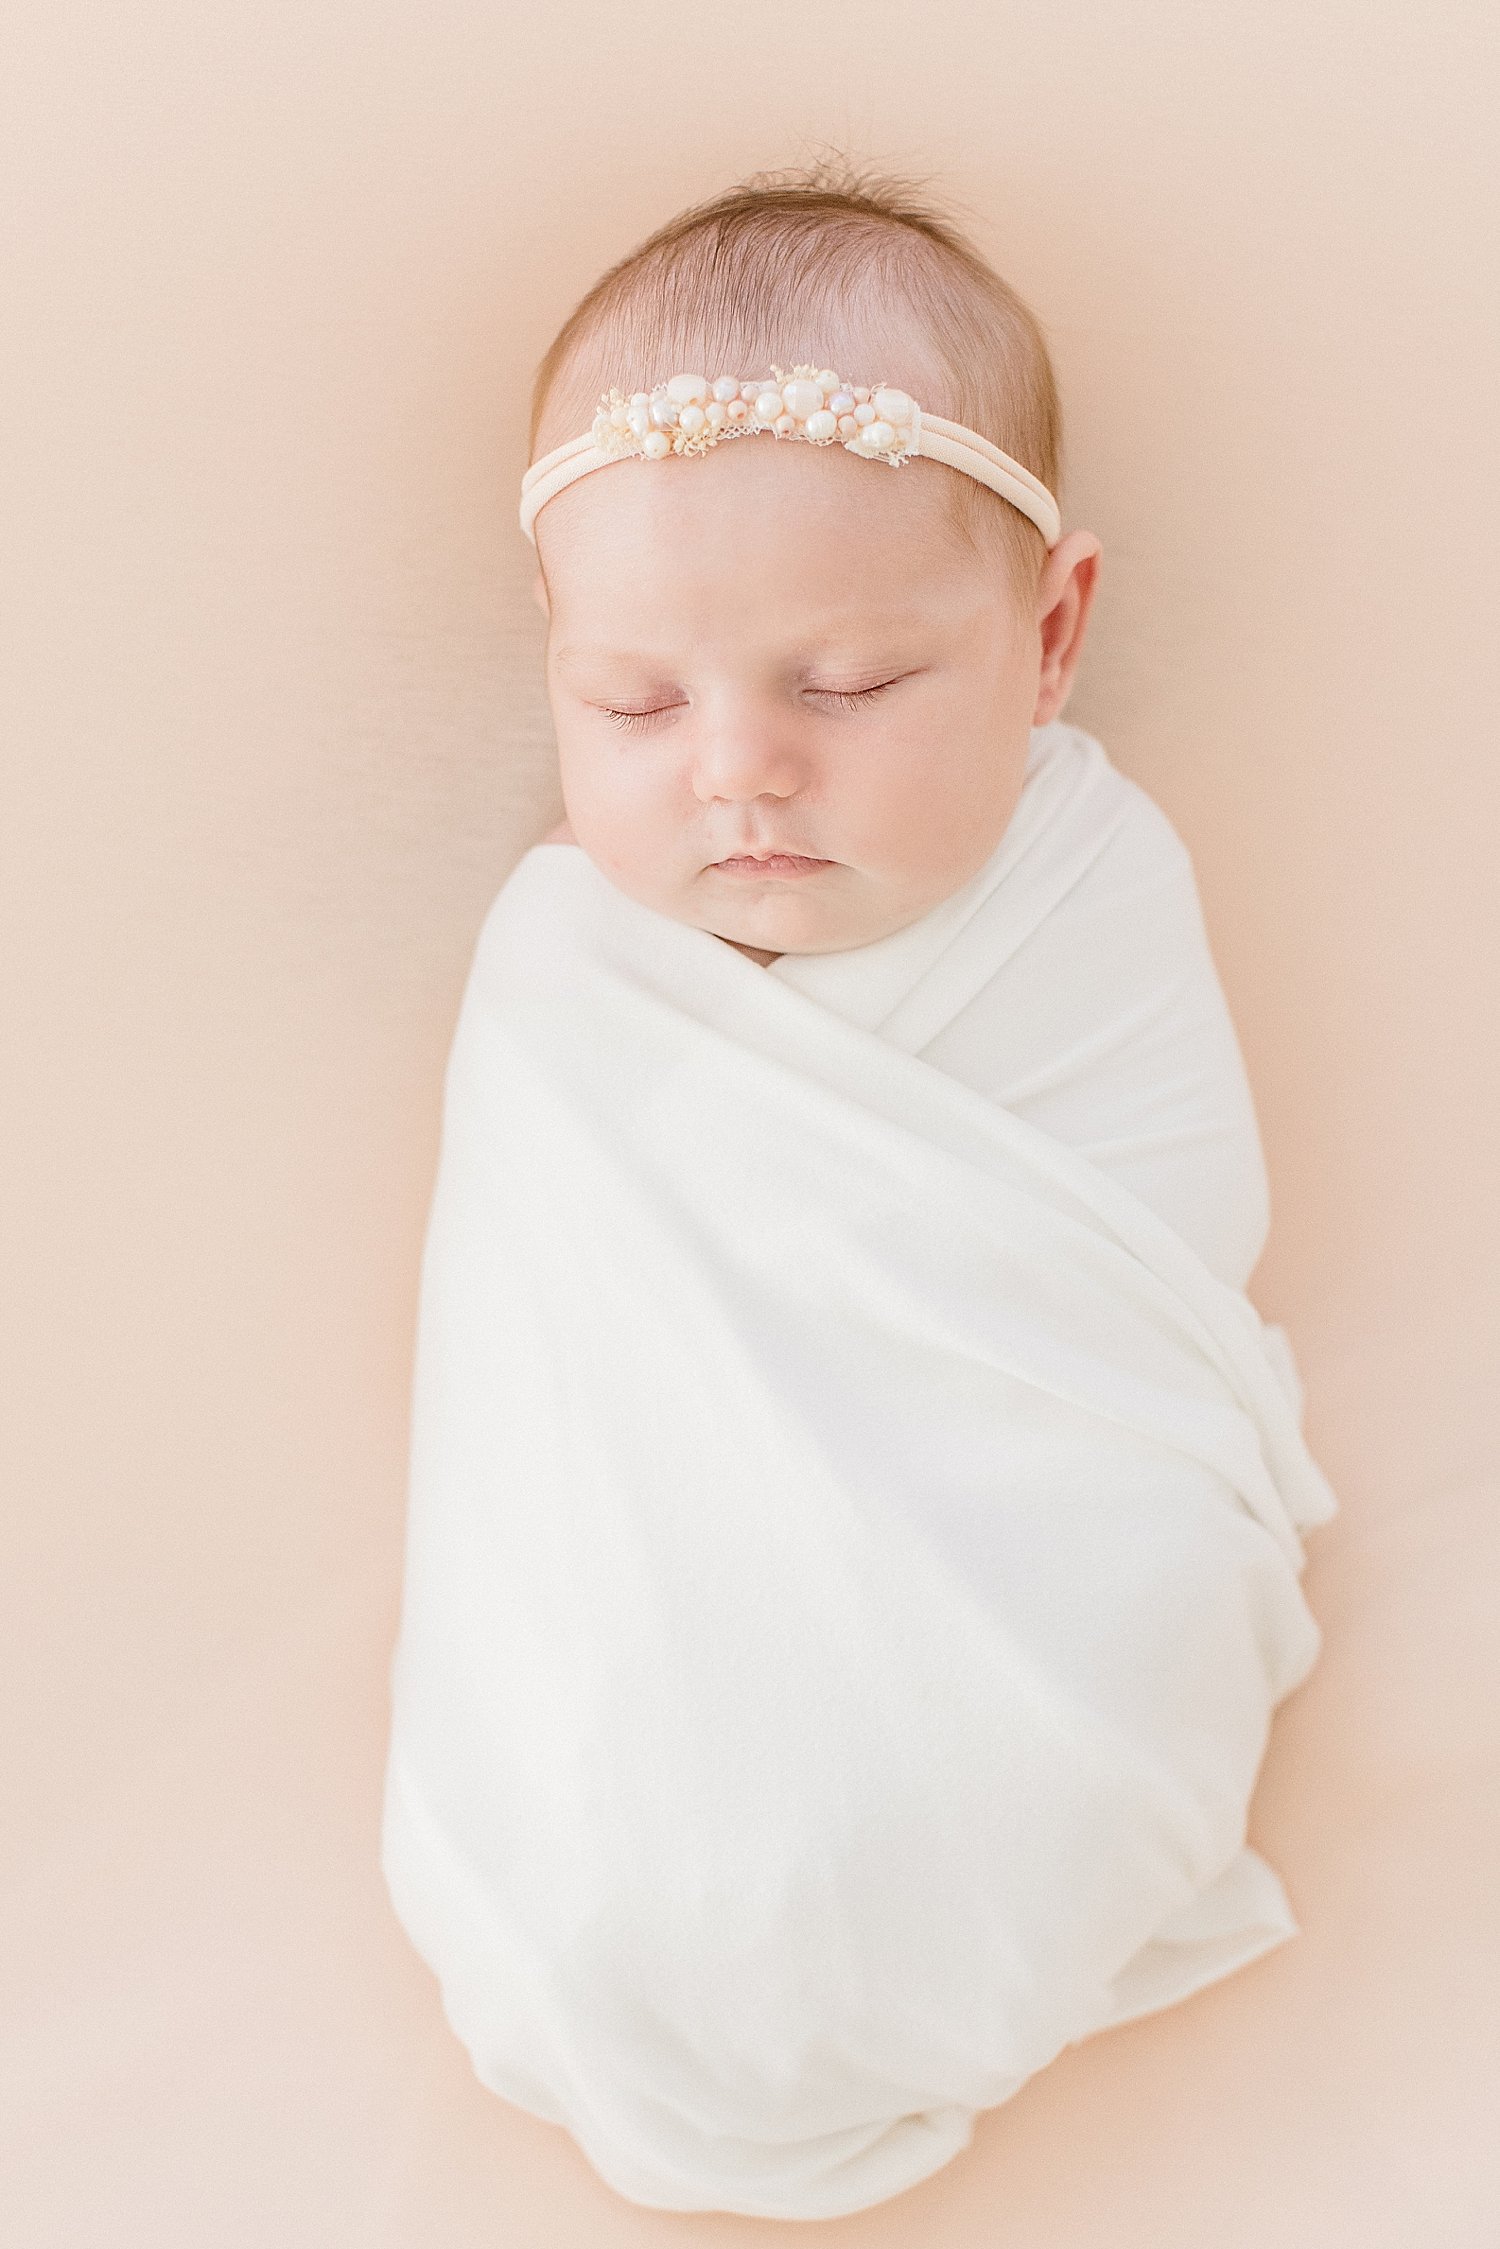 Baby girl swaddled and sleeping for newborn session | Ambre Williams Photography